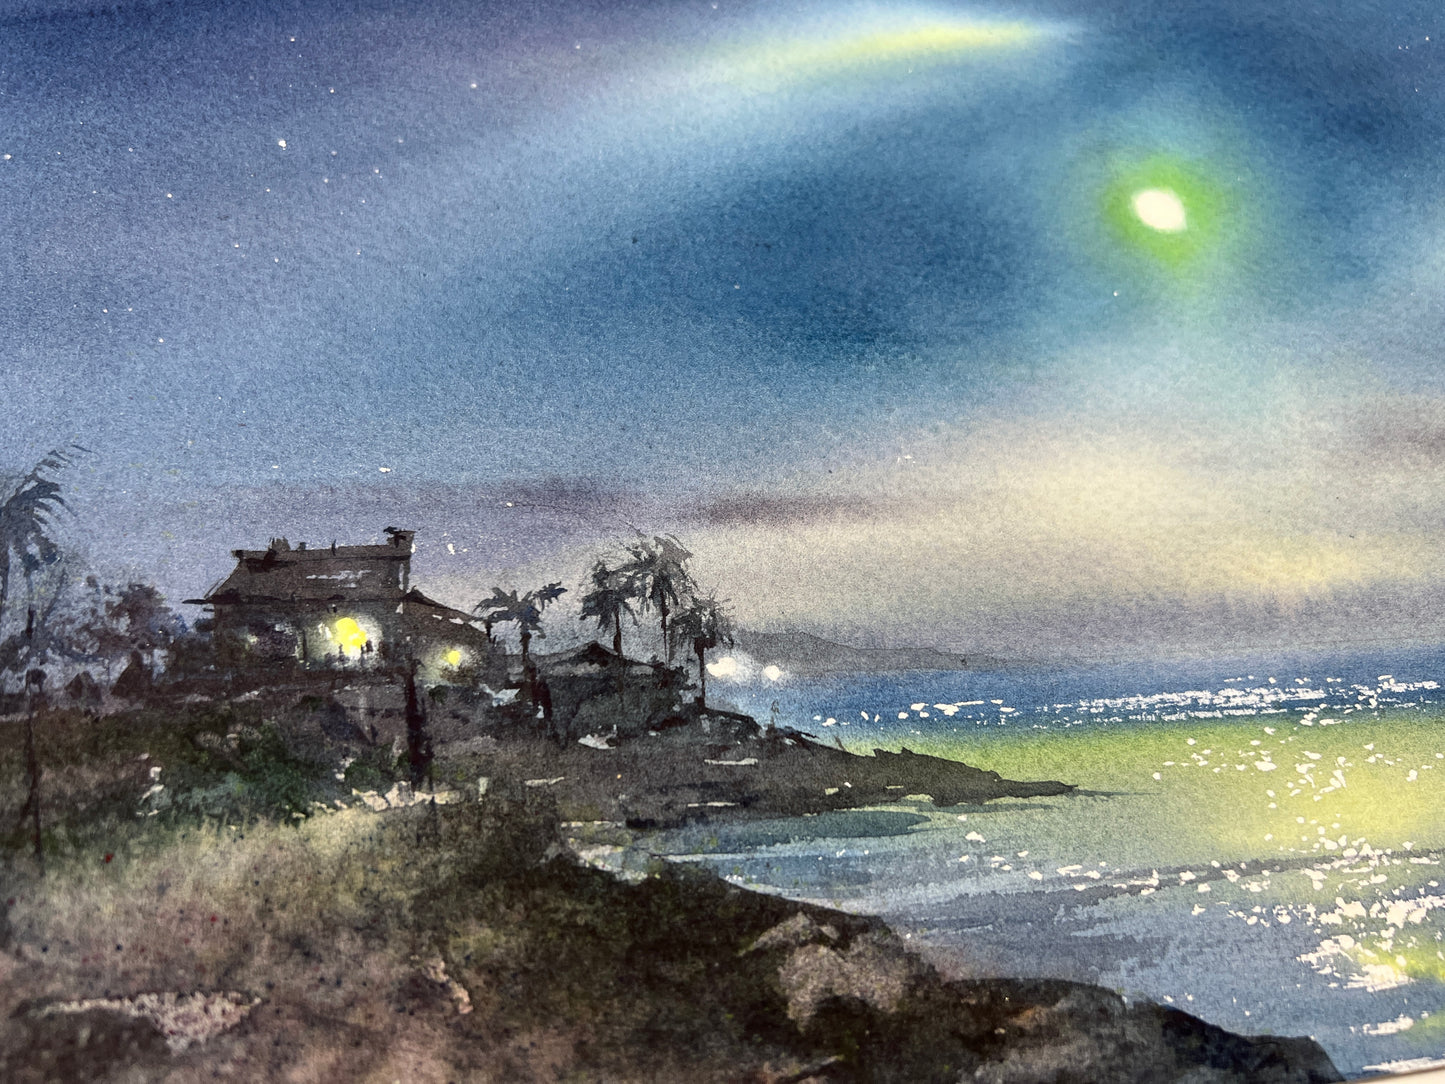 Watercolor Painting "In the Moonlight #11" - Moon Art Original, Celestial Night Sky 8x12, Ideal for Home Decor Gift